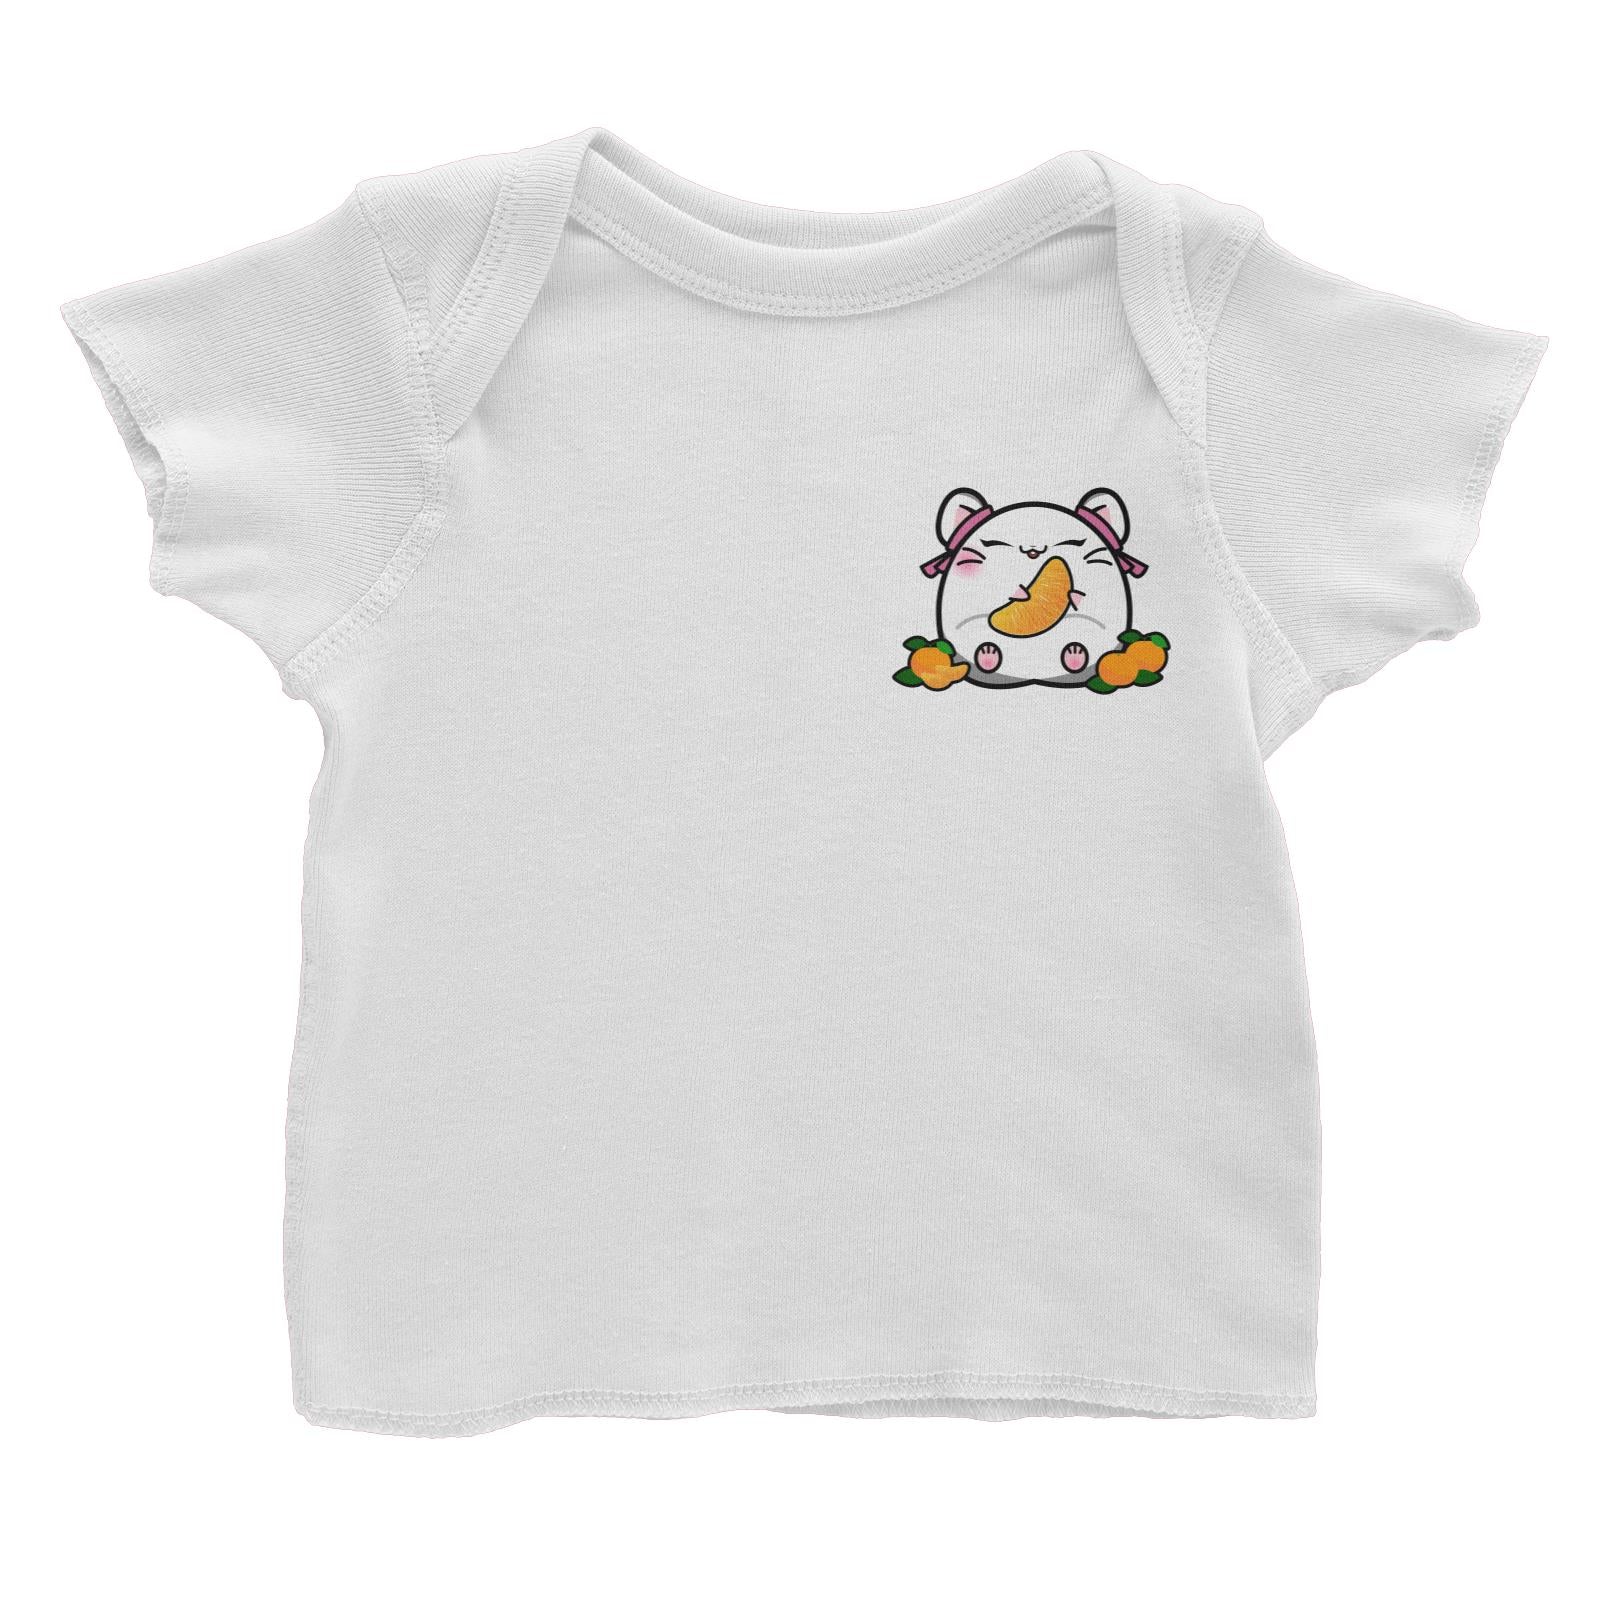 Prosperous Pocket Mouse Series Joy Smile and Luck Baby T-Shirt